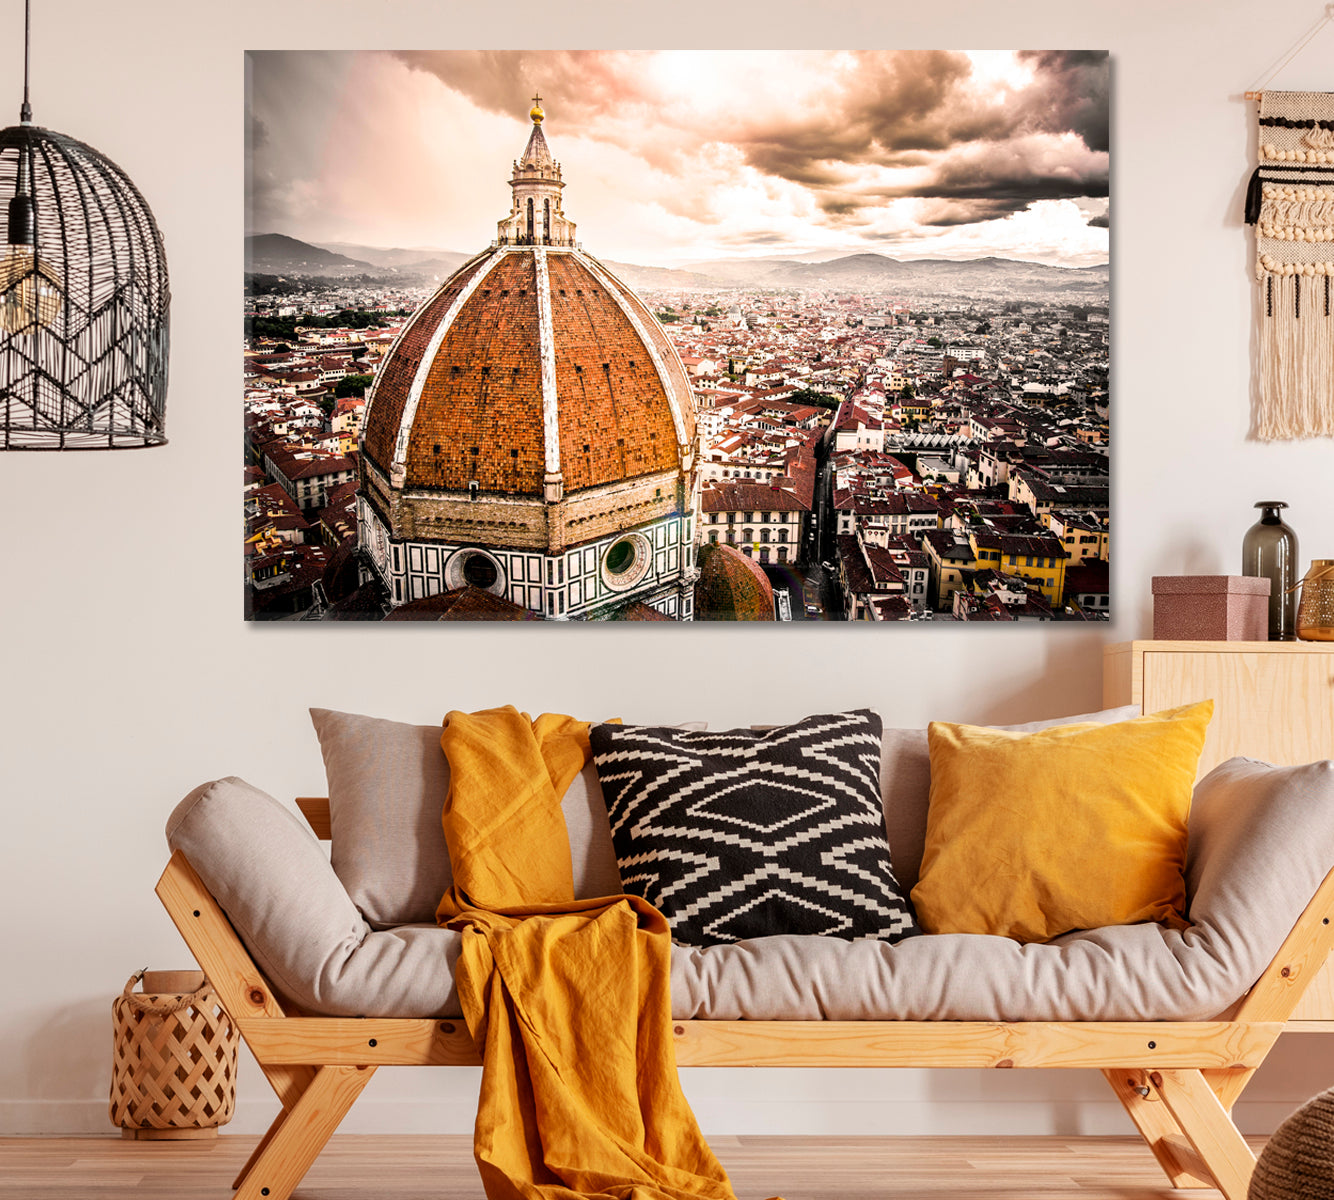 Cathedral Santa Maria del Fiore Florence Italy Canvas Print ArtLexy 1 Panel 24"x16" inches 